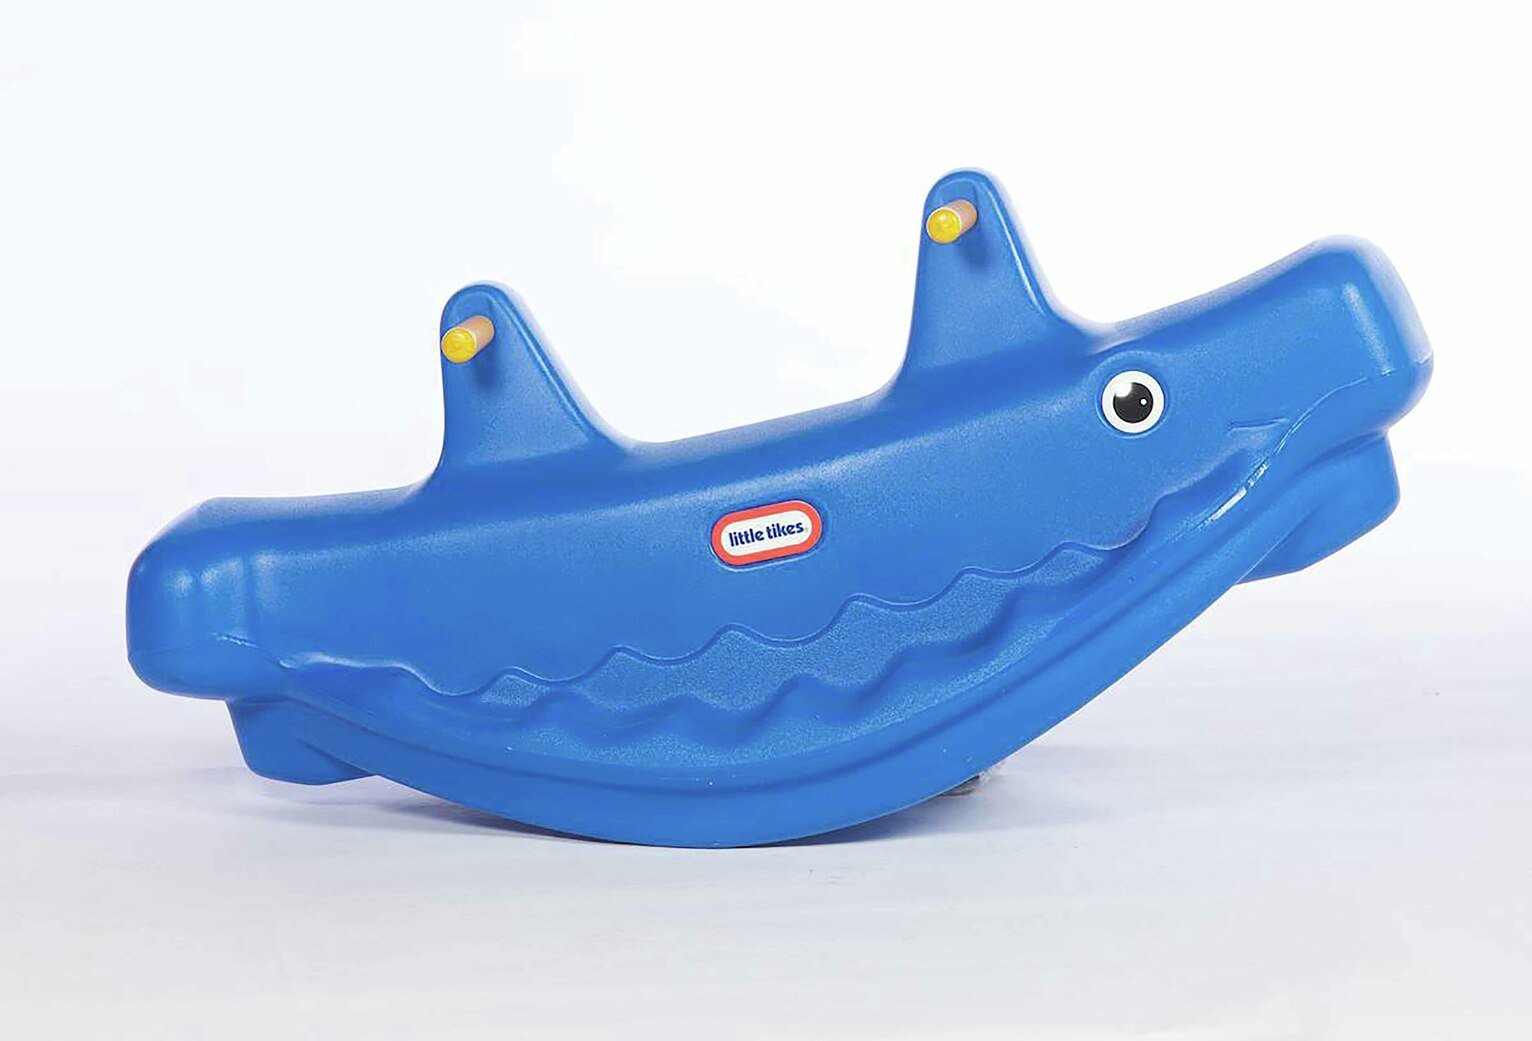 Little Tikes Whale Teeter Totter - Blue.